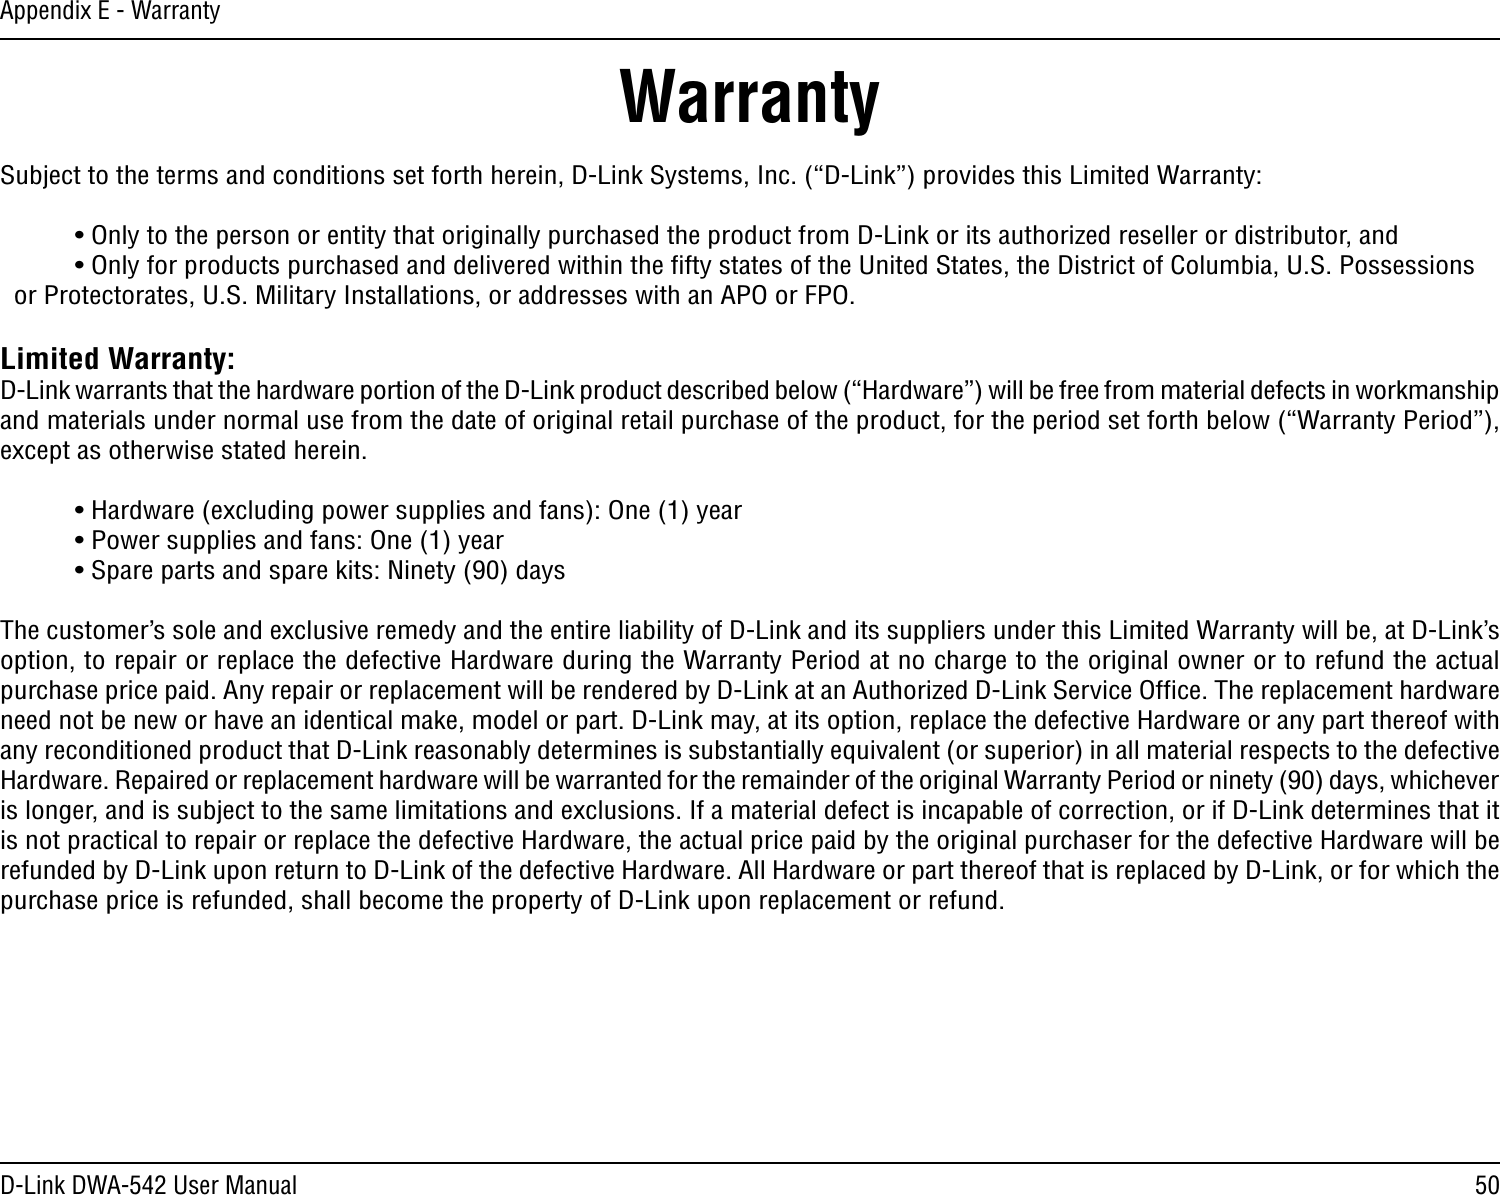 50D-Link DWA-542 User ManualAppendix E - WarrantyWarrantySubject to the terms and conditions set forth herein, D-Link Systems, Inc. (“D-Link”) provides this Limited Warranty:  • Only to the person or entity that originally purchased the product from D-Link or its authorized reseller or distributor, and  • Only for products purchased and delivered within the ﬁfty states of the United States, the District of Columbia, U.S. Possessions      or Protectorates, U.S. Military Installations, or addresses with an APO or FPO.Limited Warranty:D-Link warrants that the hardware portion of the D-Link product described below (“Hardware”) will be free from material defects in workmanship and materials under normal use from the date of original retail purchase of the product, for the period set forth below (“Warranty Period”), except as otherwise stated herein.  • Hardware (excluding power supplies and fans): One (1) year  • Power supplies and fans: One (1) year  • Spare parts and spare kits: Ninety (90) daysThe customer’s sole and exclusive remedy and the entire liability of D-Link and its suppliers under this Limited Warranty will be, at D-Link’s option, to repair or replace the defective Hardware during the Warranty Period at no charge to the original owner or to refund the actual purchase price paid. Any repair or replacement will be rendered by D-Link at an Authorized D-Link Service Ofﬁce. The replacement hardware need not be new or have an identical make, model or part. D-Link may, at its option, replace the defective Hardware or any part thereof with any reconditioned product that D-Link reasonably determines is substantially equivalent (or superior) in all material respects to the defective Hardware. Repaired or replacement hardware will be warranted for the remainder of the original Warranty Period or ninety (90) days, whichever is longer, and is subject to the same limitations and exclusions. If a material defect is incapable of correction, or if D-Link determines that it is not practical to repair or replace the defective Hardware, the actual price paid by the original purchaser for the defective Hardware will be refunded by D-Link upon return to D-Link of the defective Hardware. All Hardware or part thereof that is replaced by D-Link, or for which the purchase price is refunded, shall become the property of D-Link upon replacement or refund.